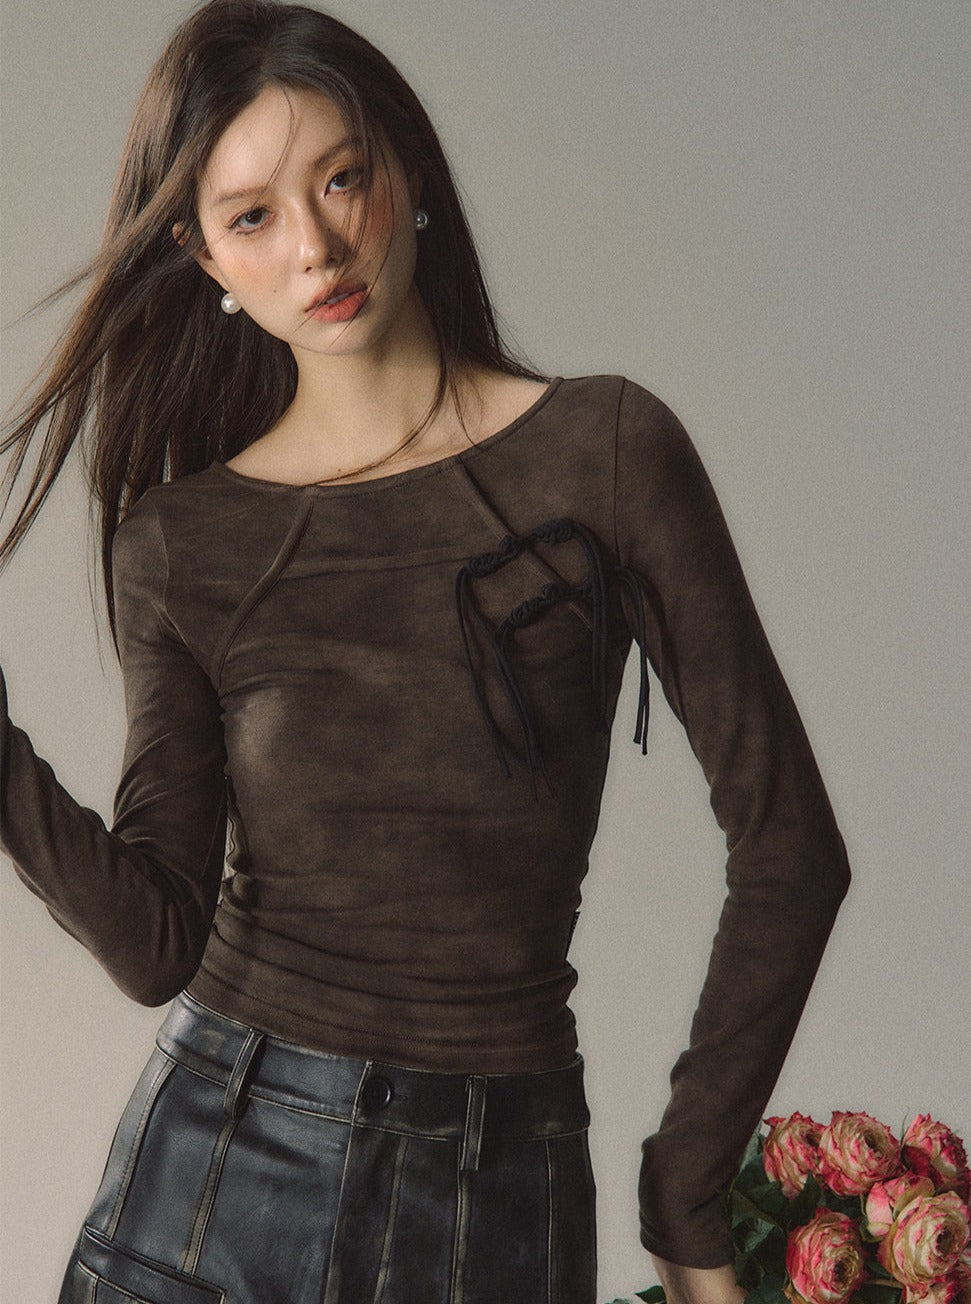 Chinese Disc Button Knitwear Tops